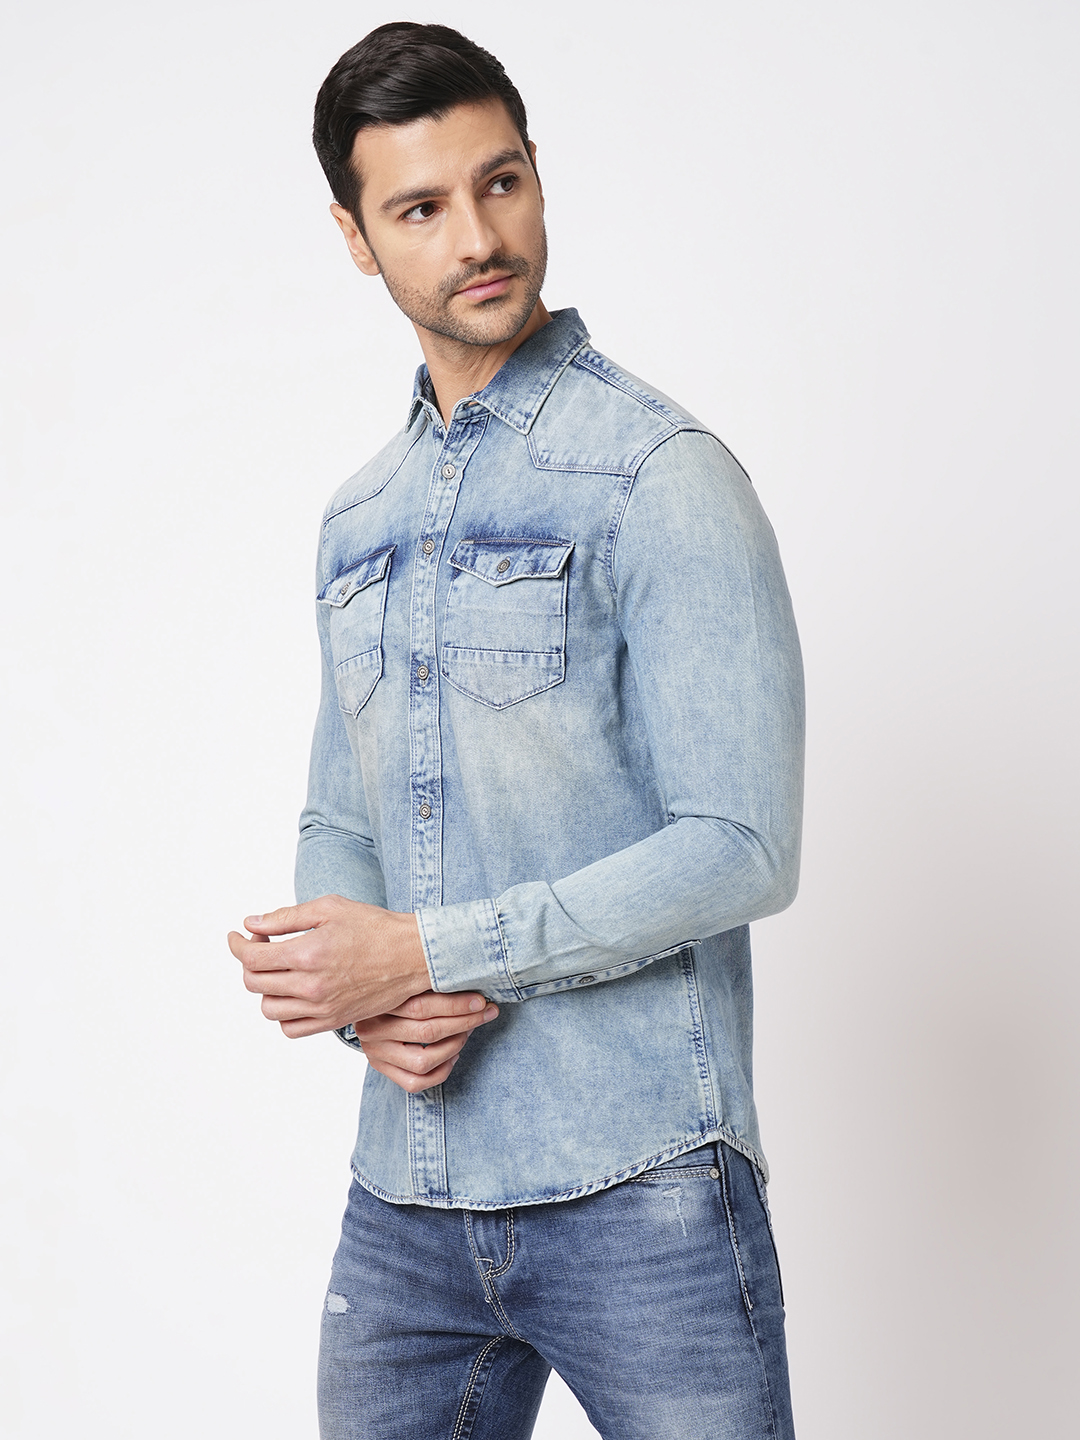 Washed Denim Shirt in Blue by Scotch & Soda – Frockaholics at Momento  Dezigns